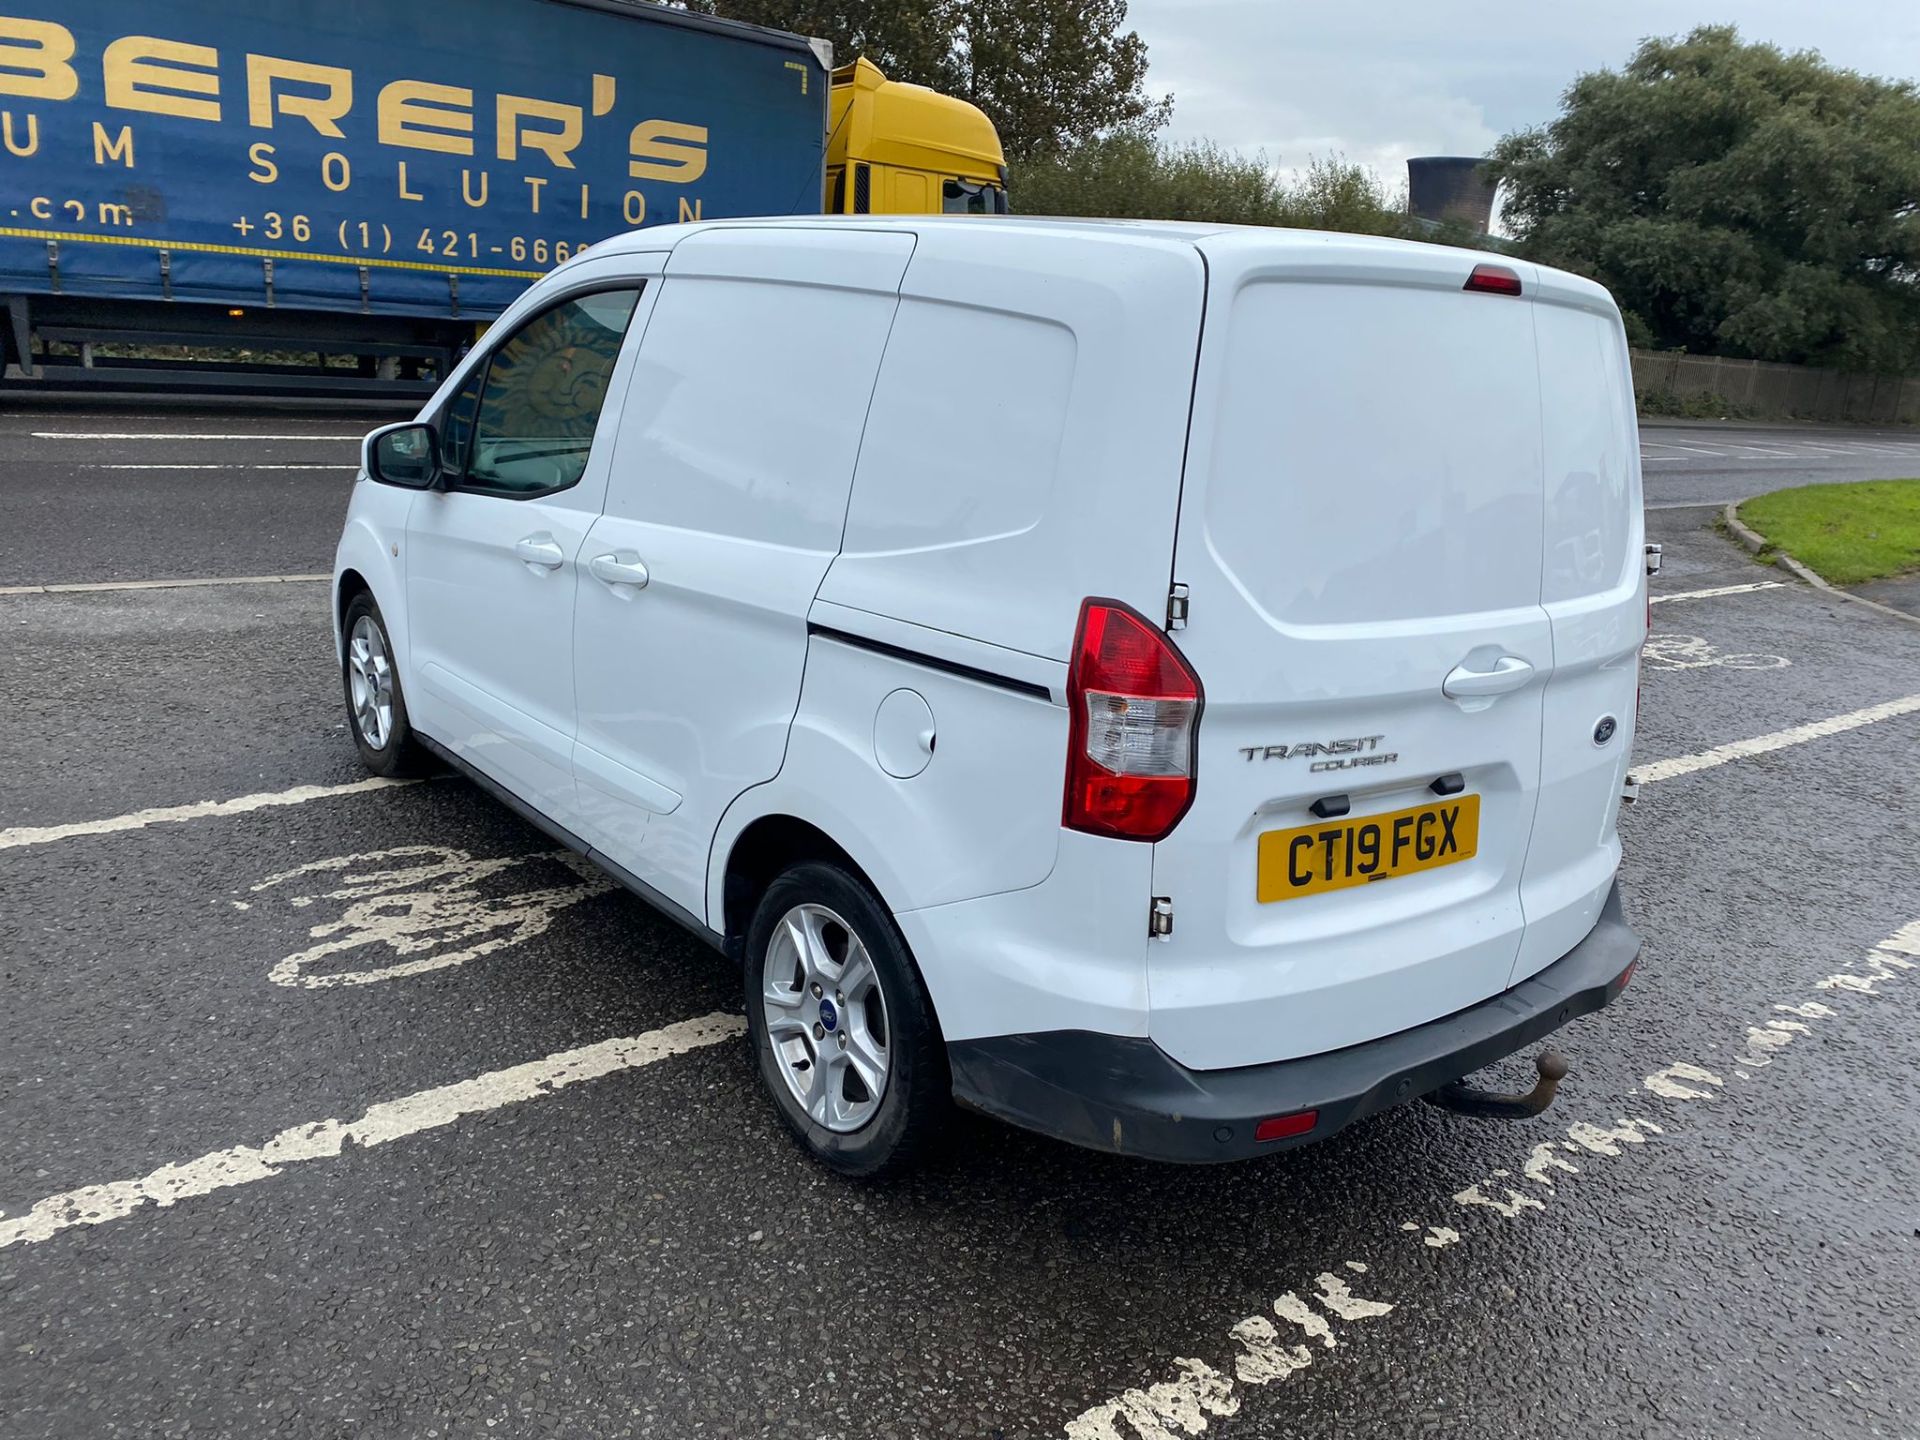 2019 19 FORD TRANSIT COURIER LIMITED PANEL VAN - ALLOY WHEELS - AIR CON - EURO 6. - Image 5 of 10